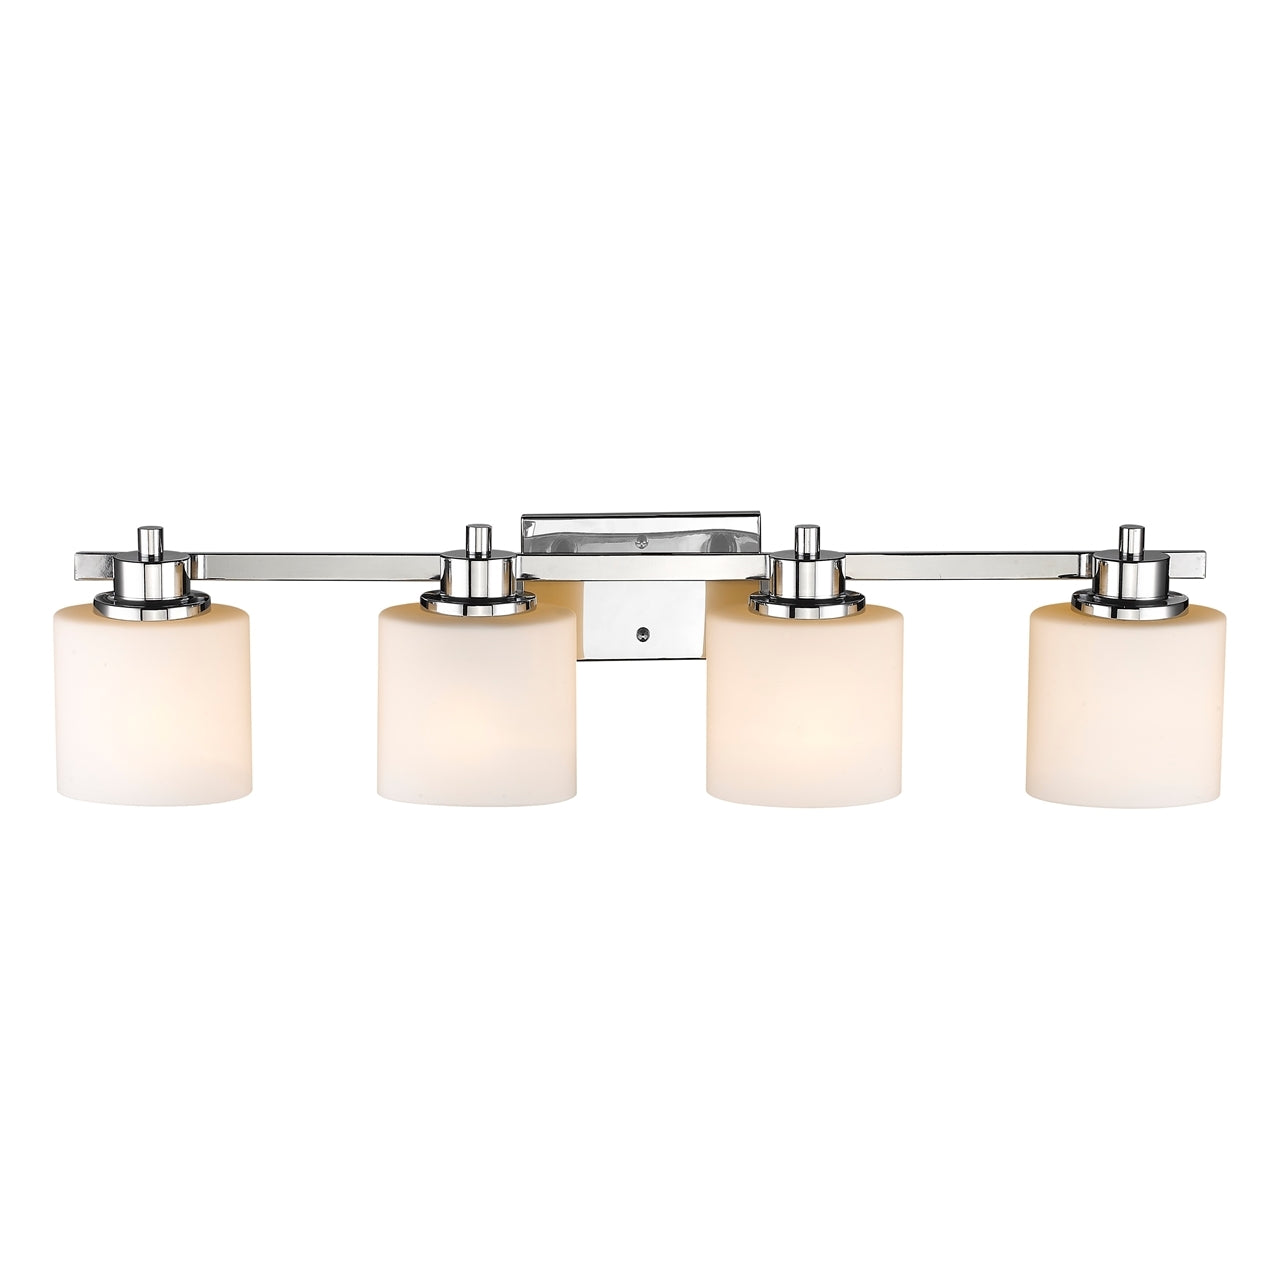 SOLBI Contemporary 4 Light Chrome Finish Bath Vanity Wall Fixture White Alabaster Glass 33" Wide